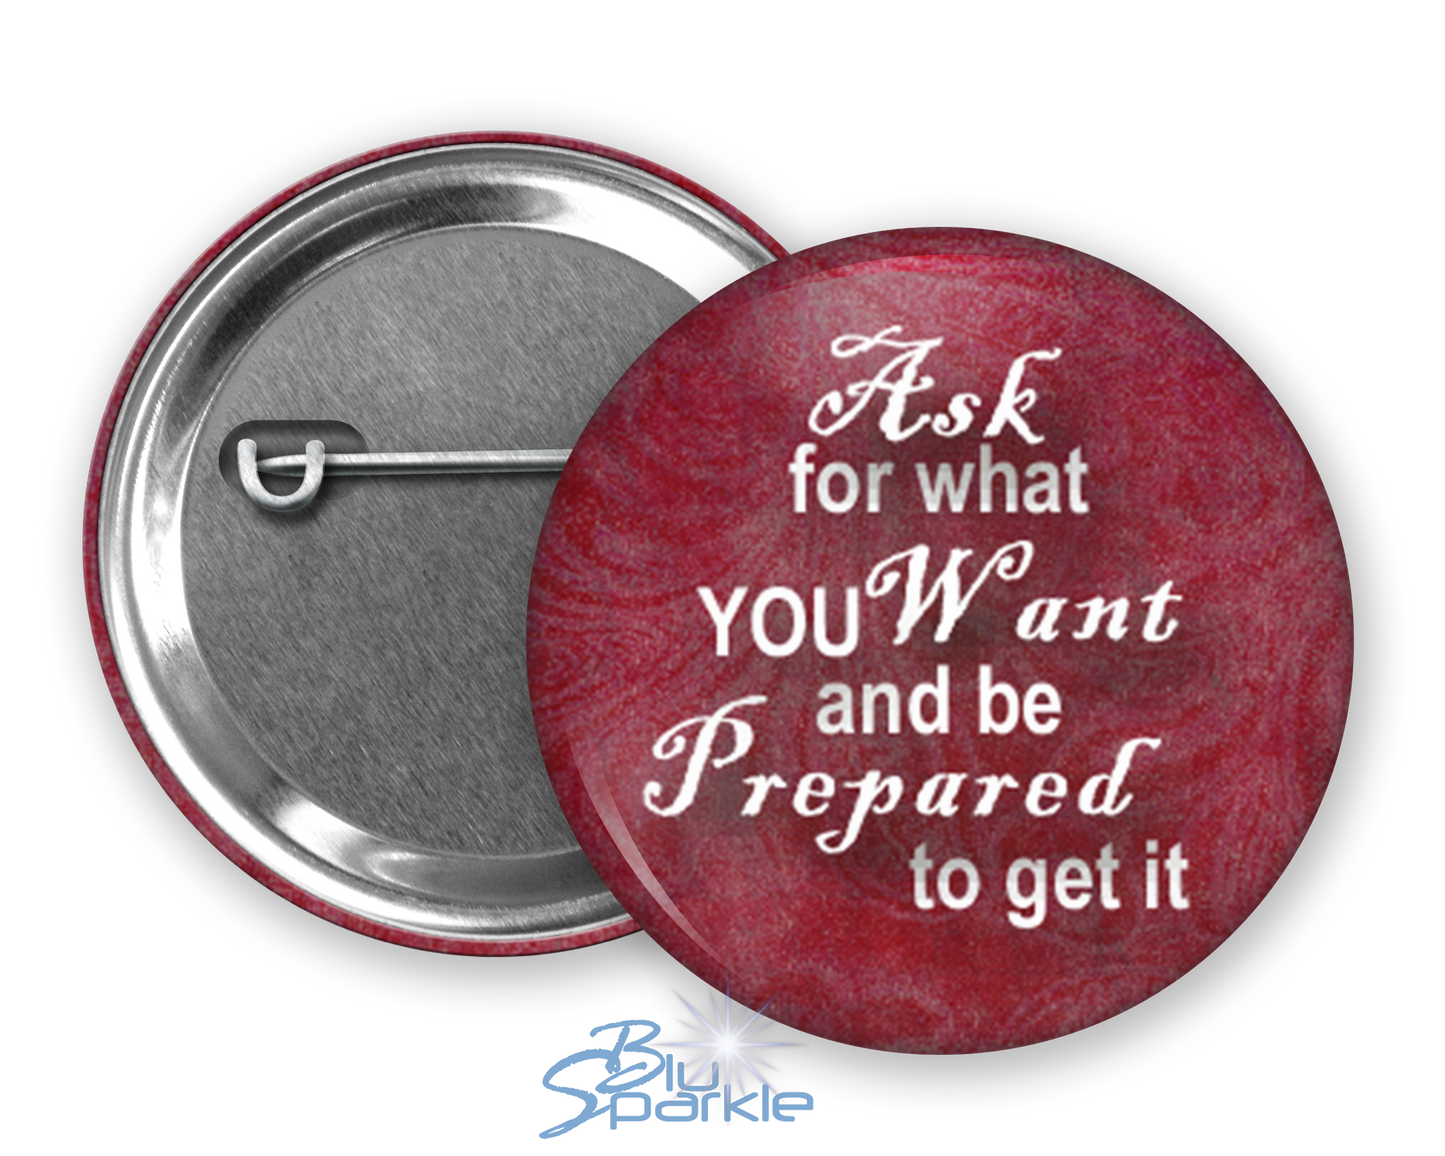 Ask For What You Want And Be Prepared To Get It - Pinback Buttons